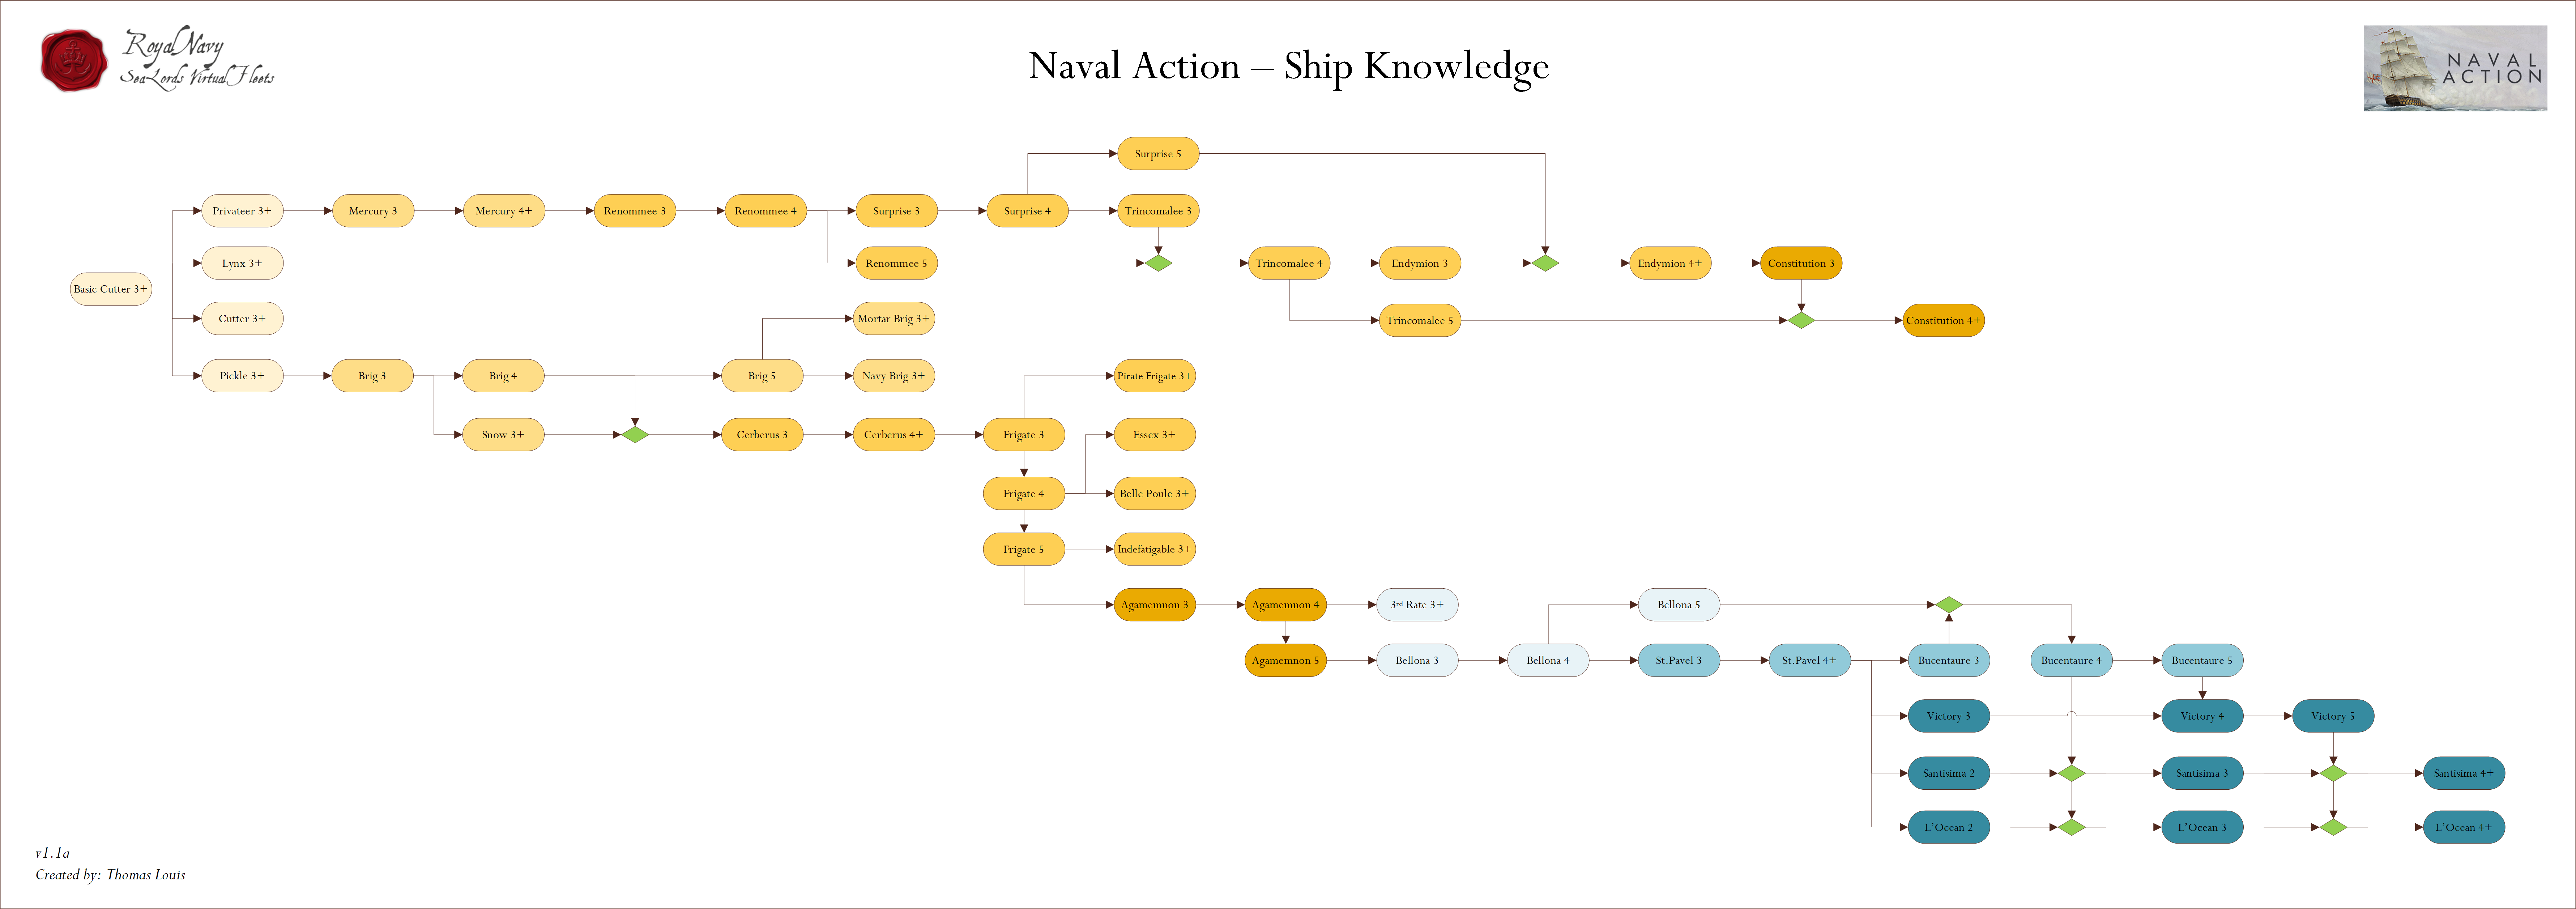 http://forum.game-labs.net/uploads/monthly_2017_06/Ship_Knowledge_Tree_NA_SLRN_v11a.png.6d46a5953400342173d0fbc2c9b5031d.png